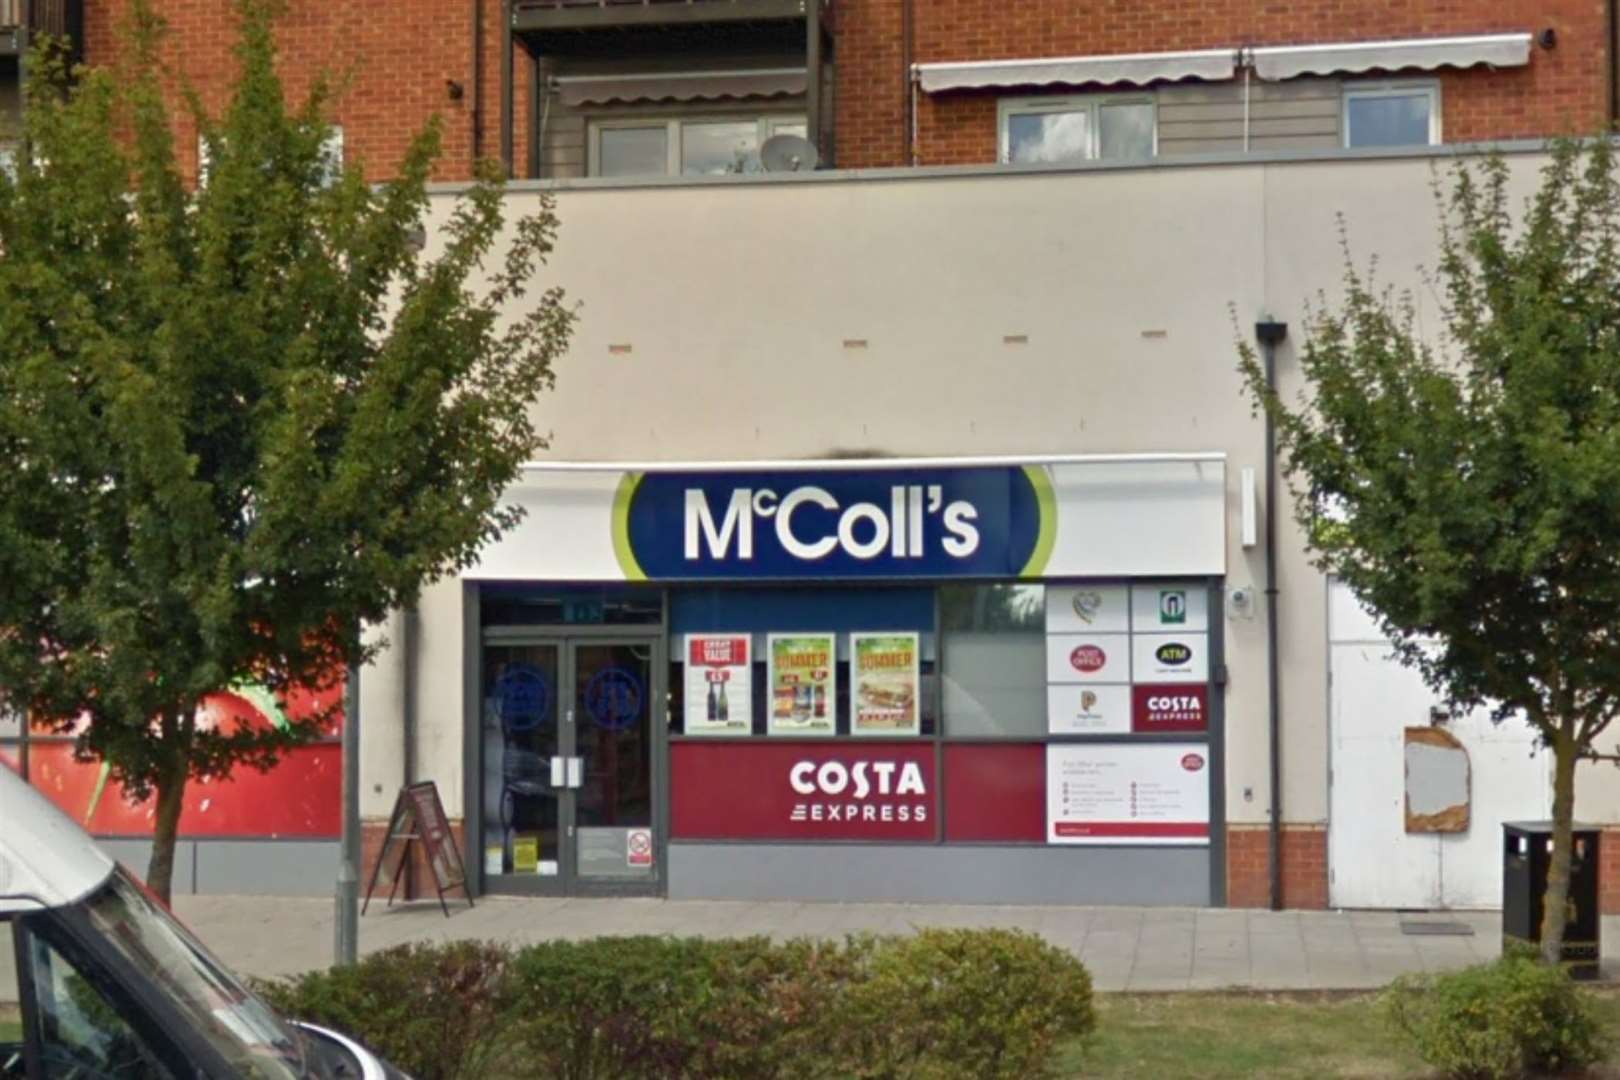 The Stanhope McColls was targeted overnight. Photo: Google Street View